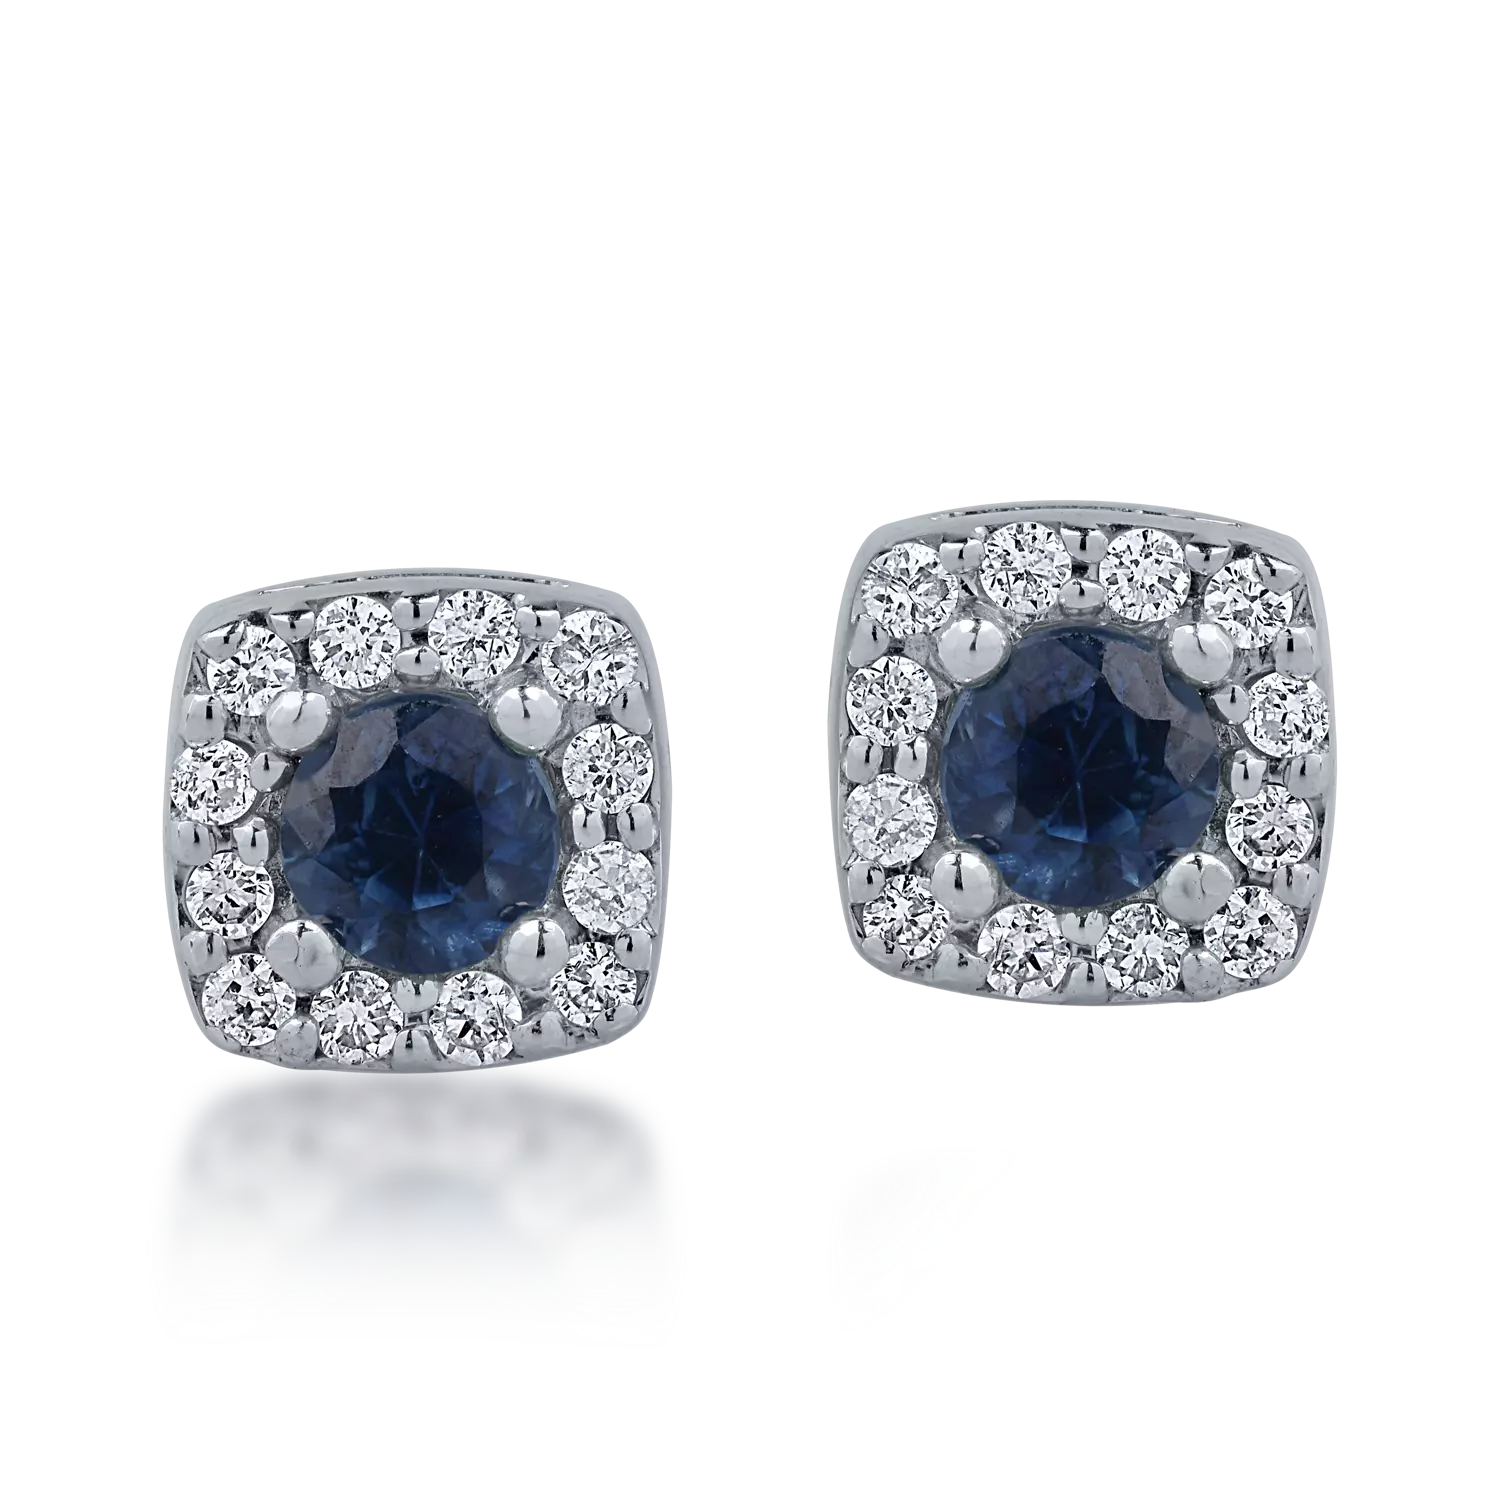 White gold earrings with 0.32ct sapphires and 0.12ct diamonds